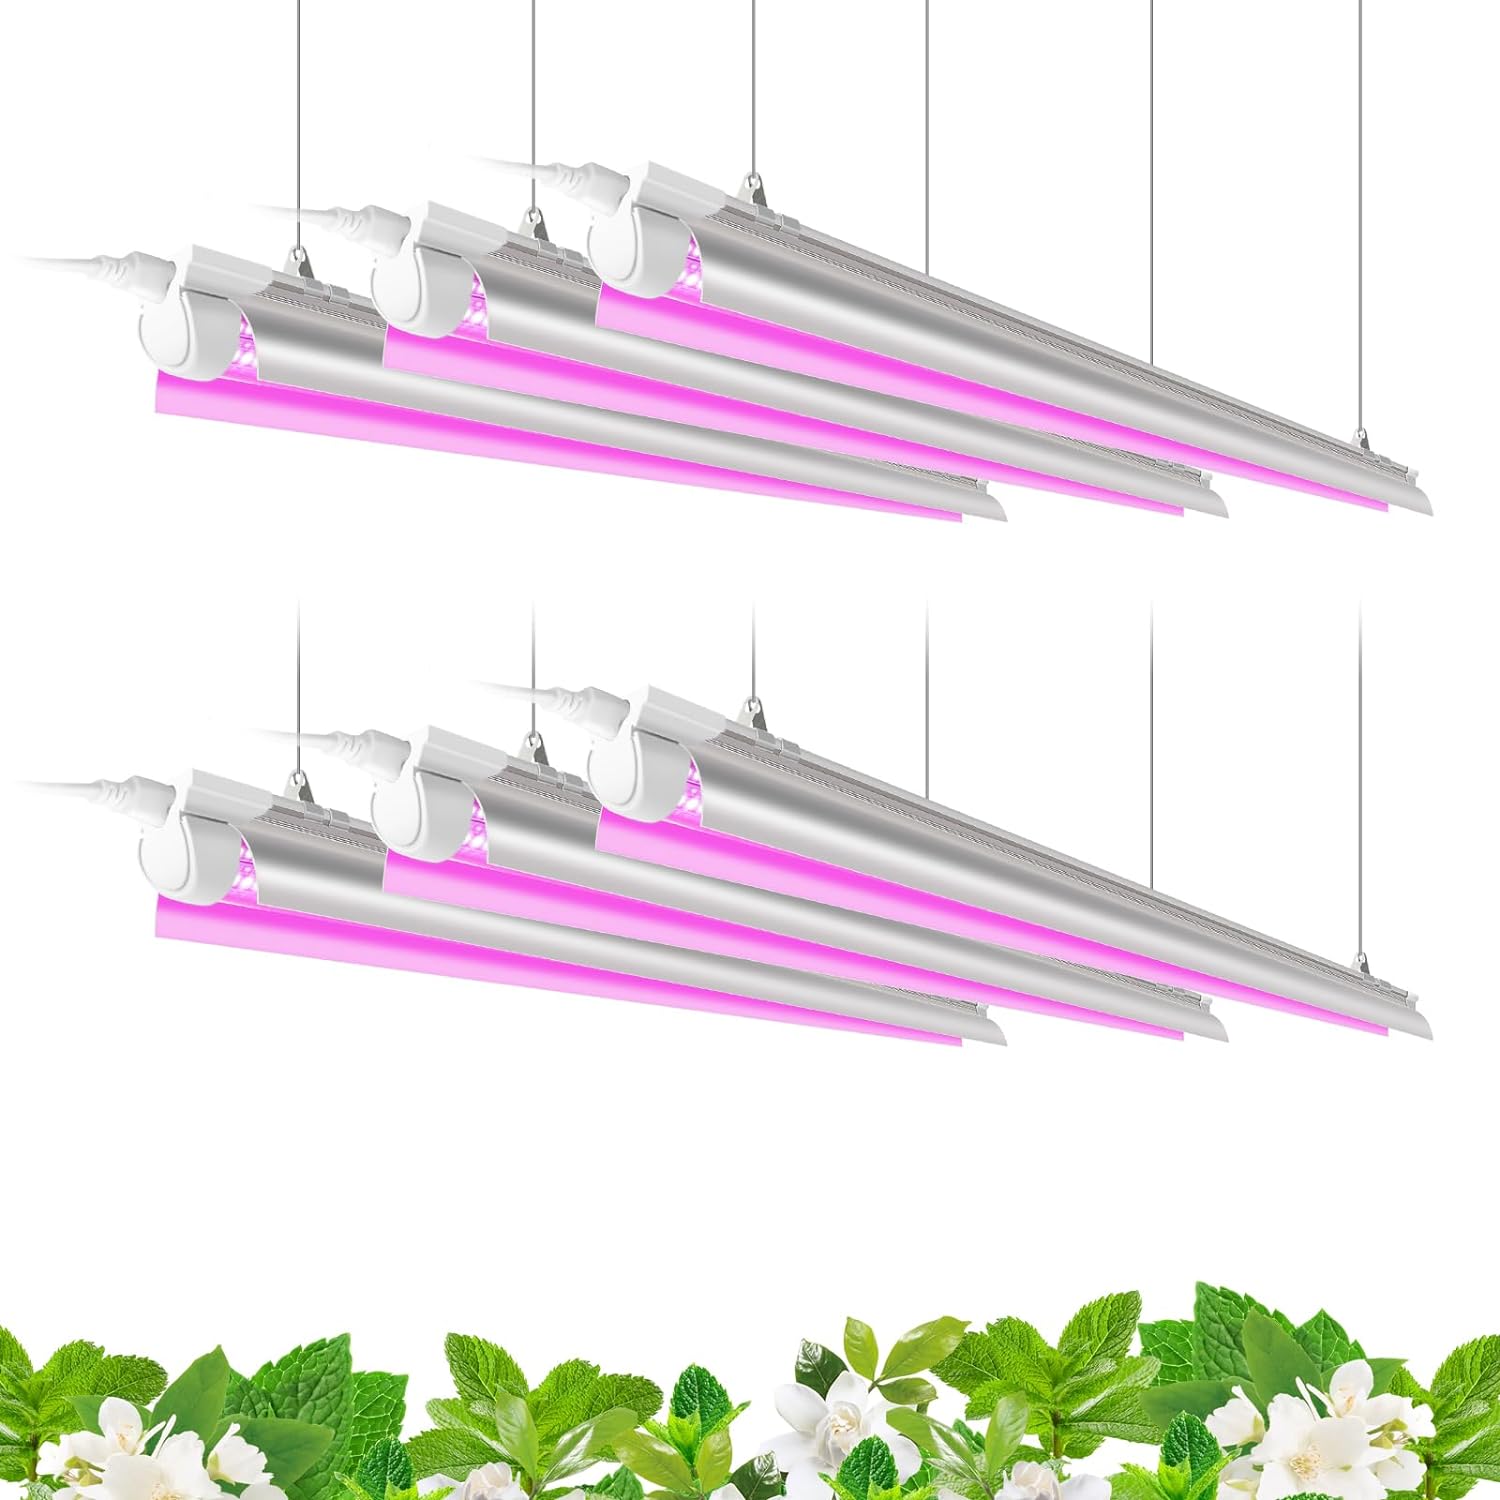 Accessories for Barrina LED Grow Light 4ft T8, 6 - Pack - Barrina led